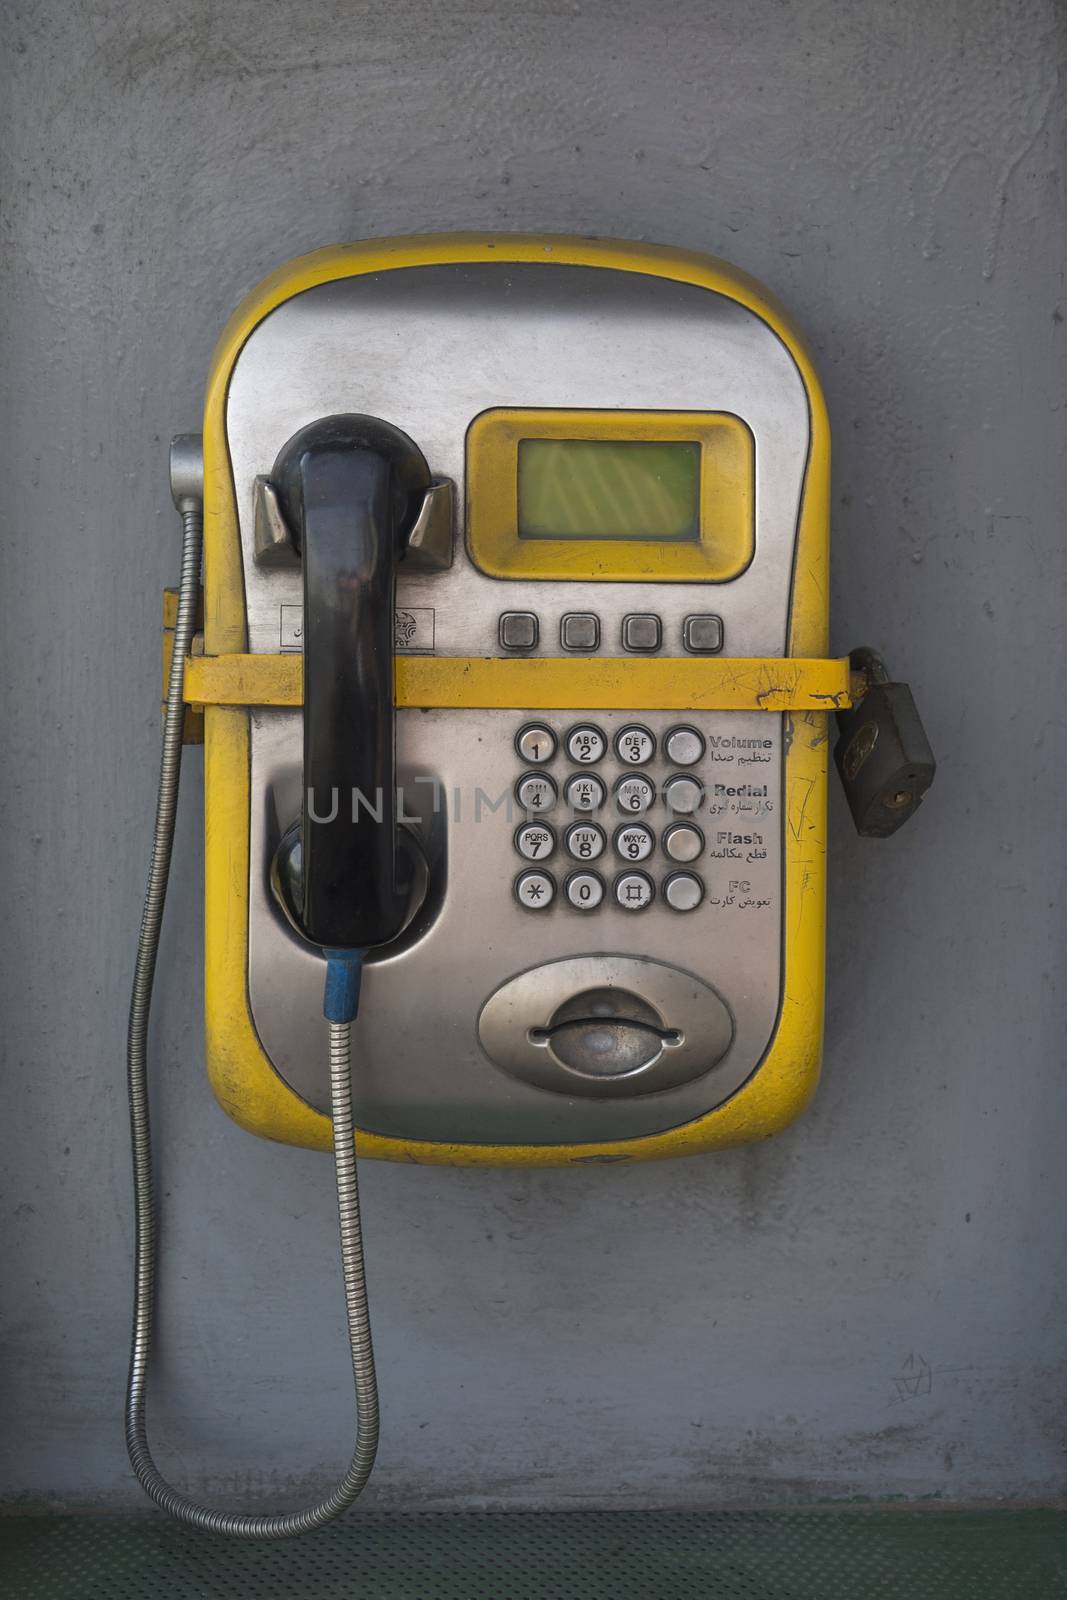 Public phone secured by bluemoon1981